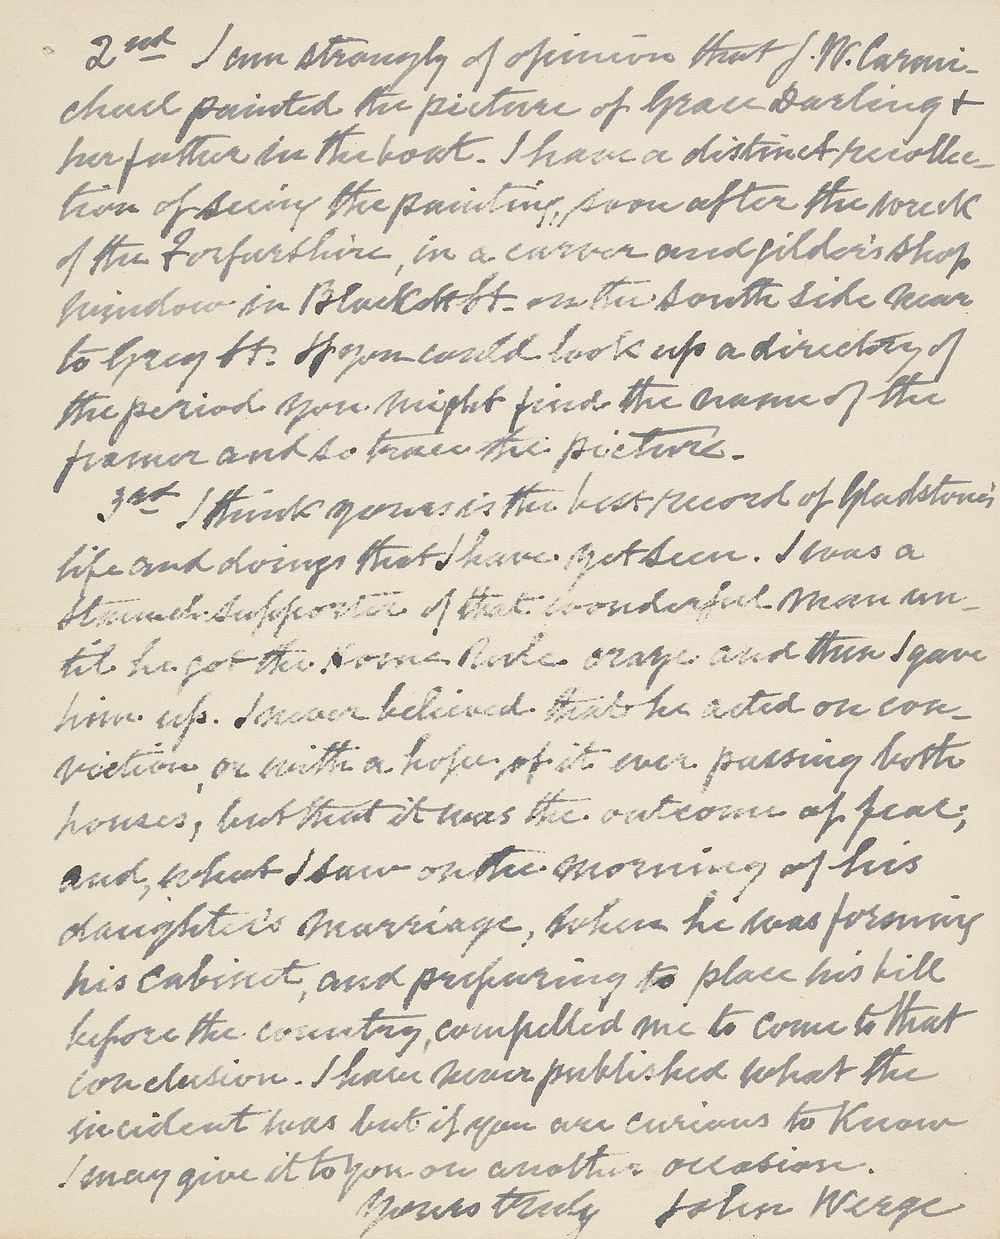 Letter from John Werge dated 30th May 1898 to Adams (two page ms)